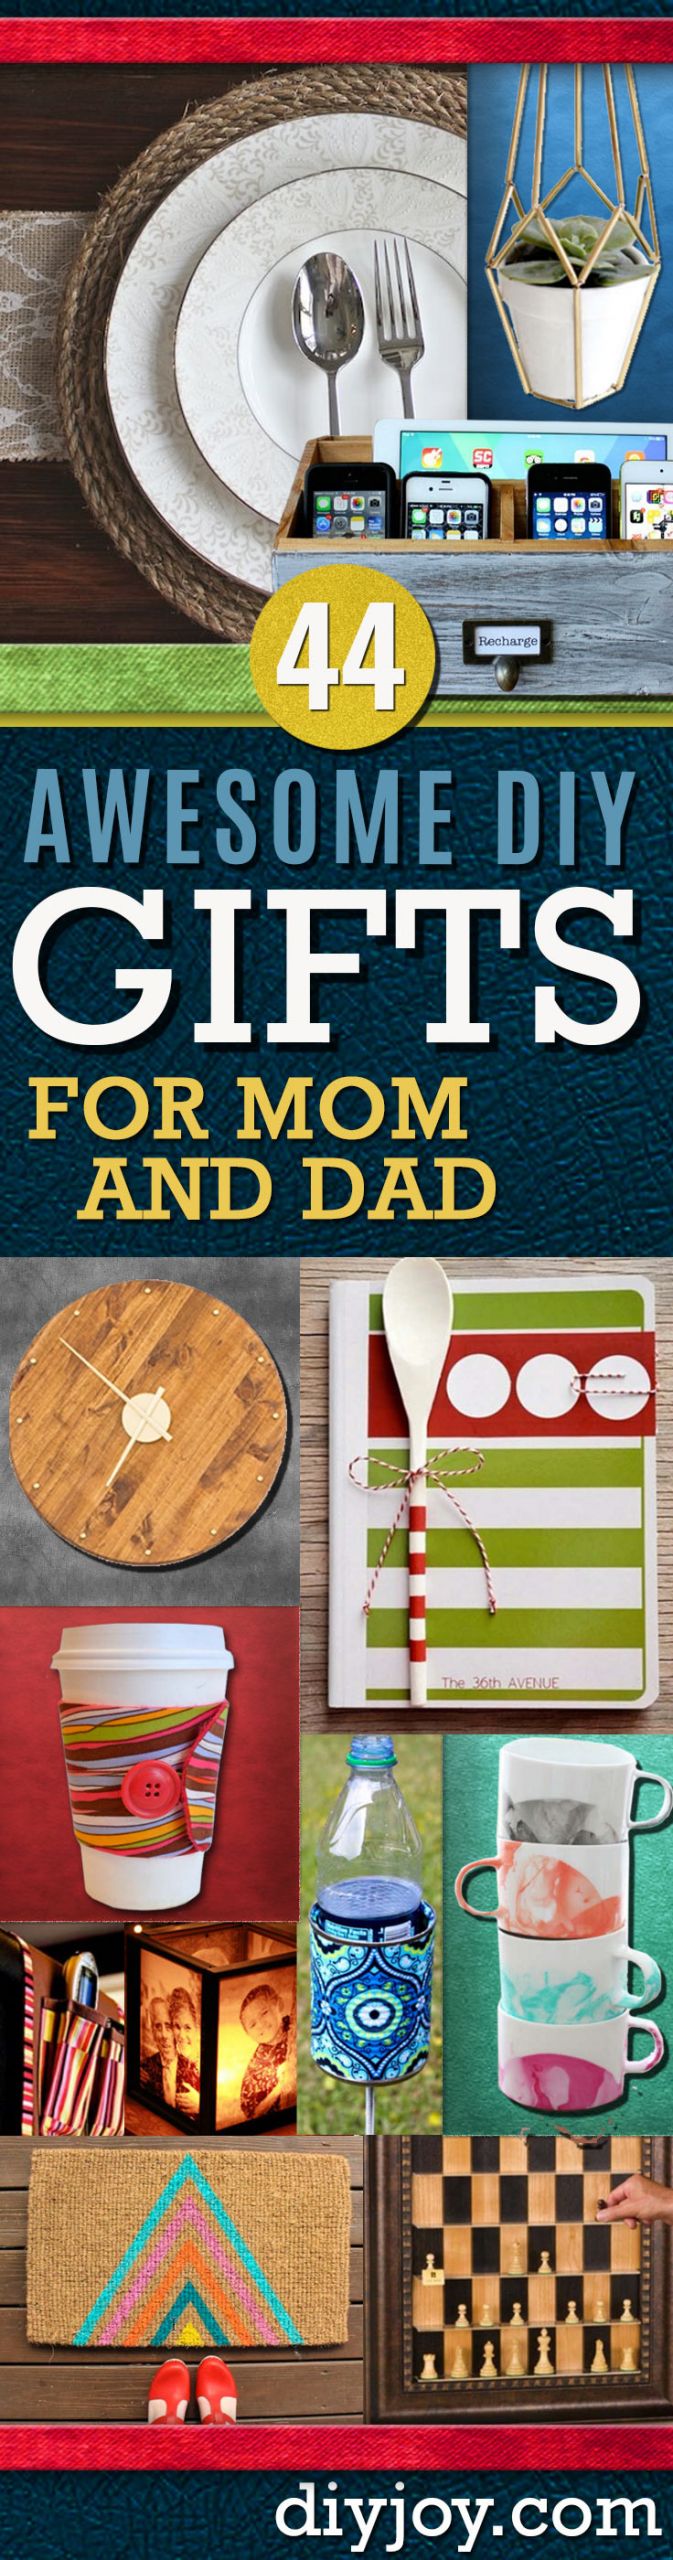 Christmas Gifts For Mom DIY
 44 DIY Gift Ideas For Mom and Dad